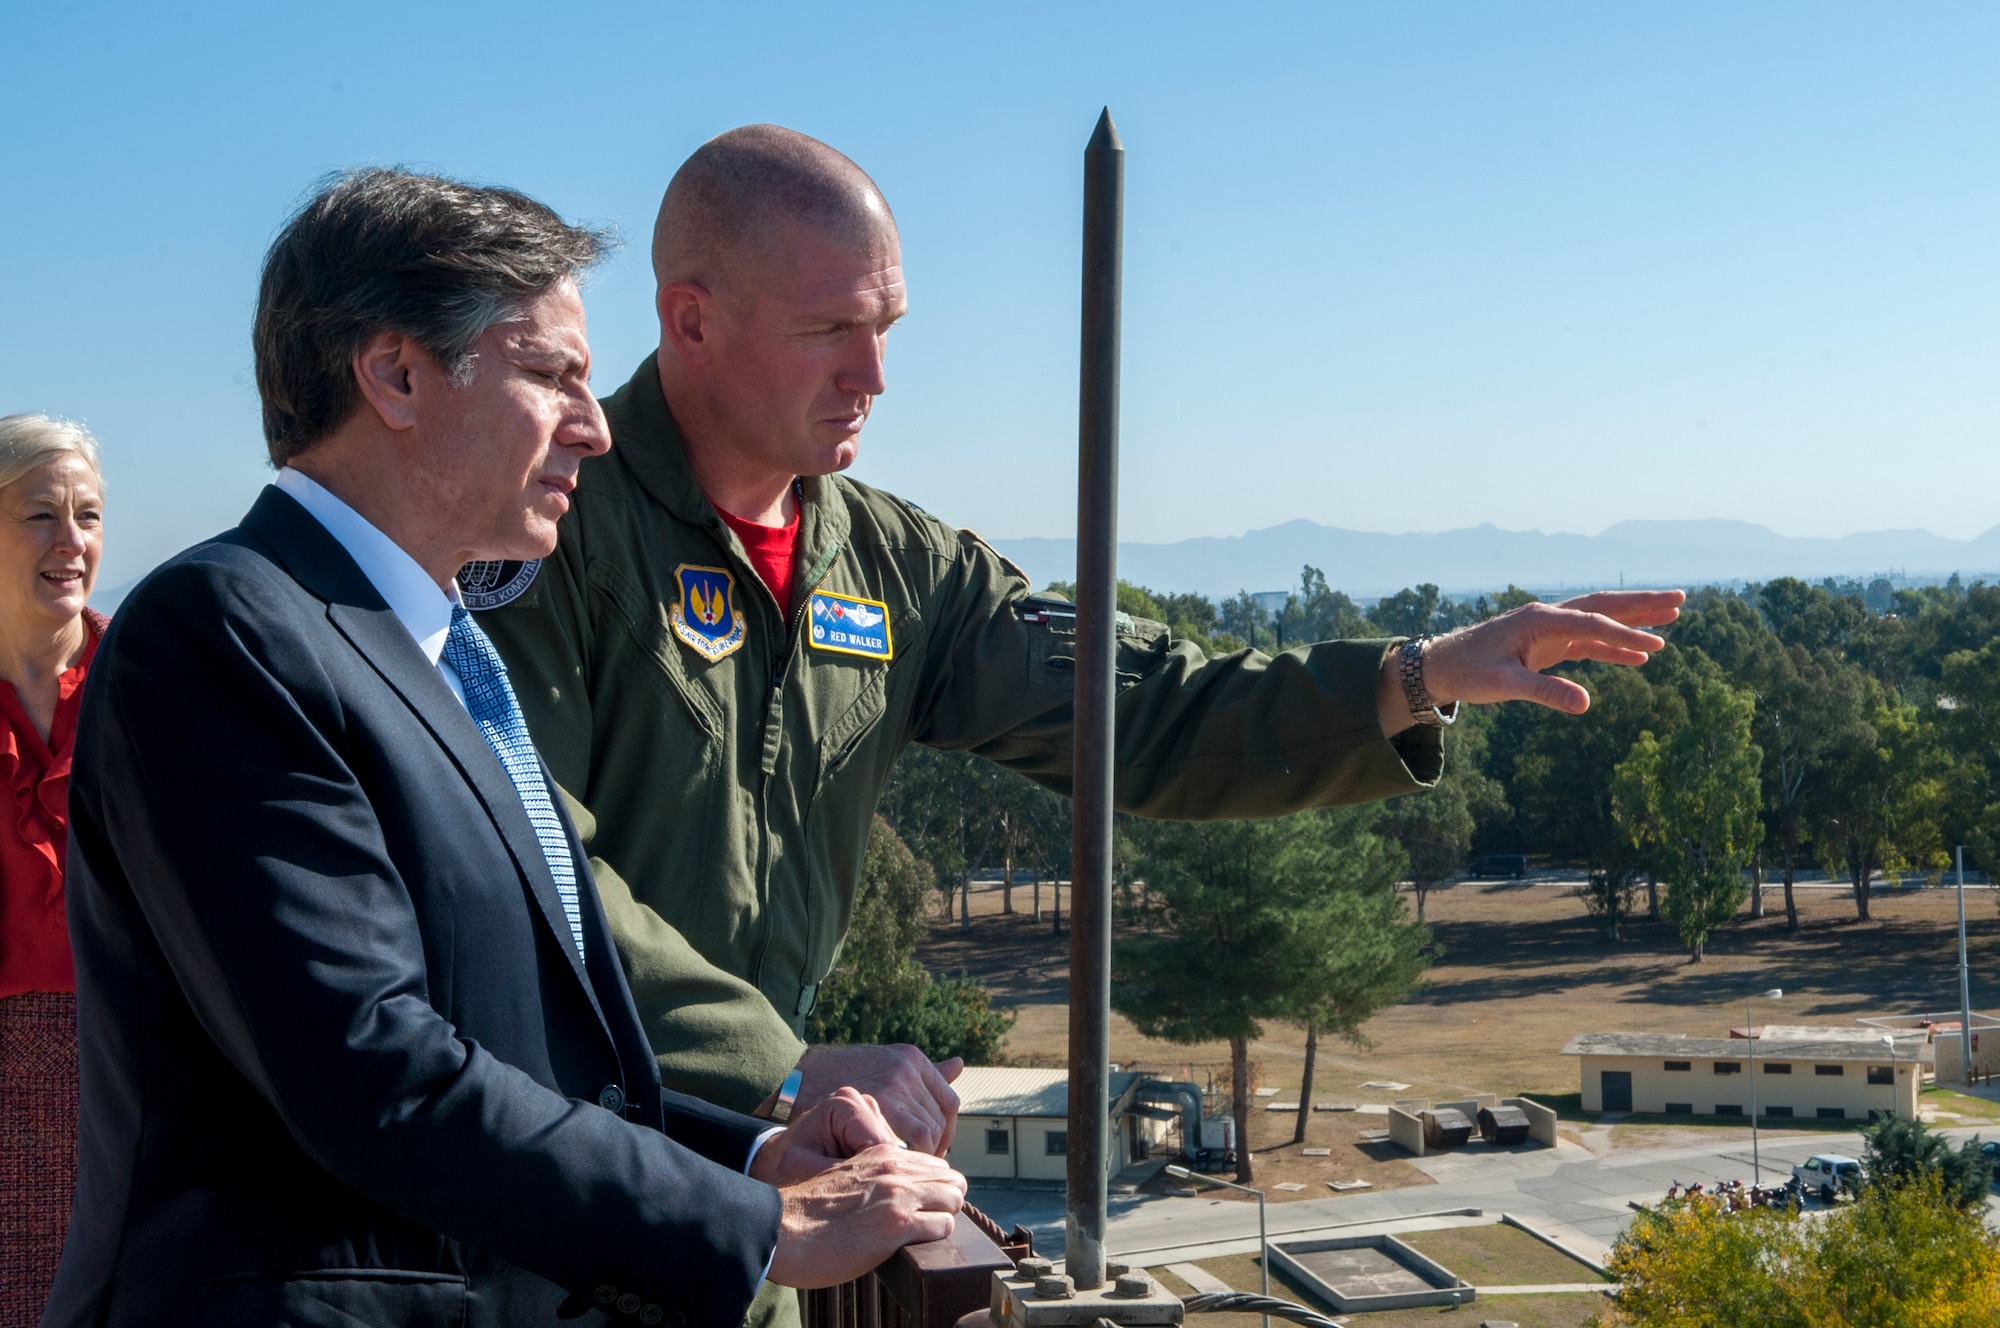 Col. John Walker, 39th Air Base Wing commander, shows U.S. Deputy Secretary of State Antony Blinken the airfield layout at Incirlik Air Base, Turkey, Nov. 20, 2015. Blinken visited Incirlik to get a firsthand look at the base’s operation. (U.S. Air Force photo by Staff Sgt. Jack Sanders/Released)